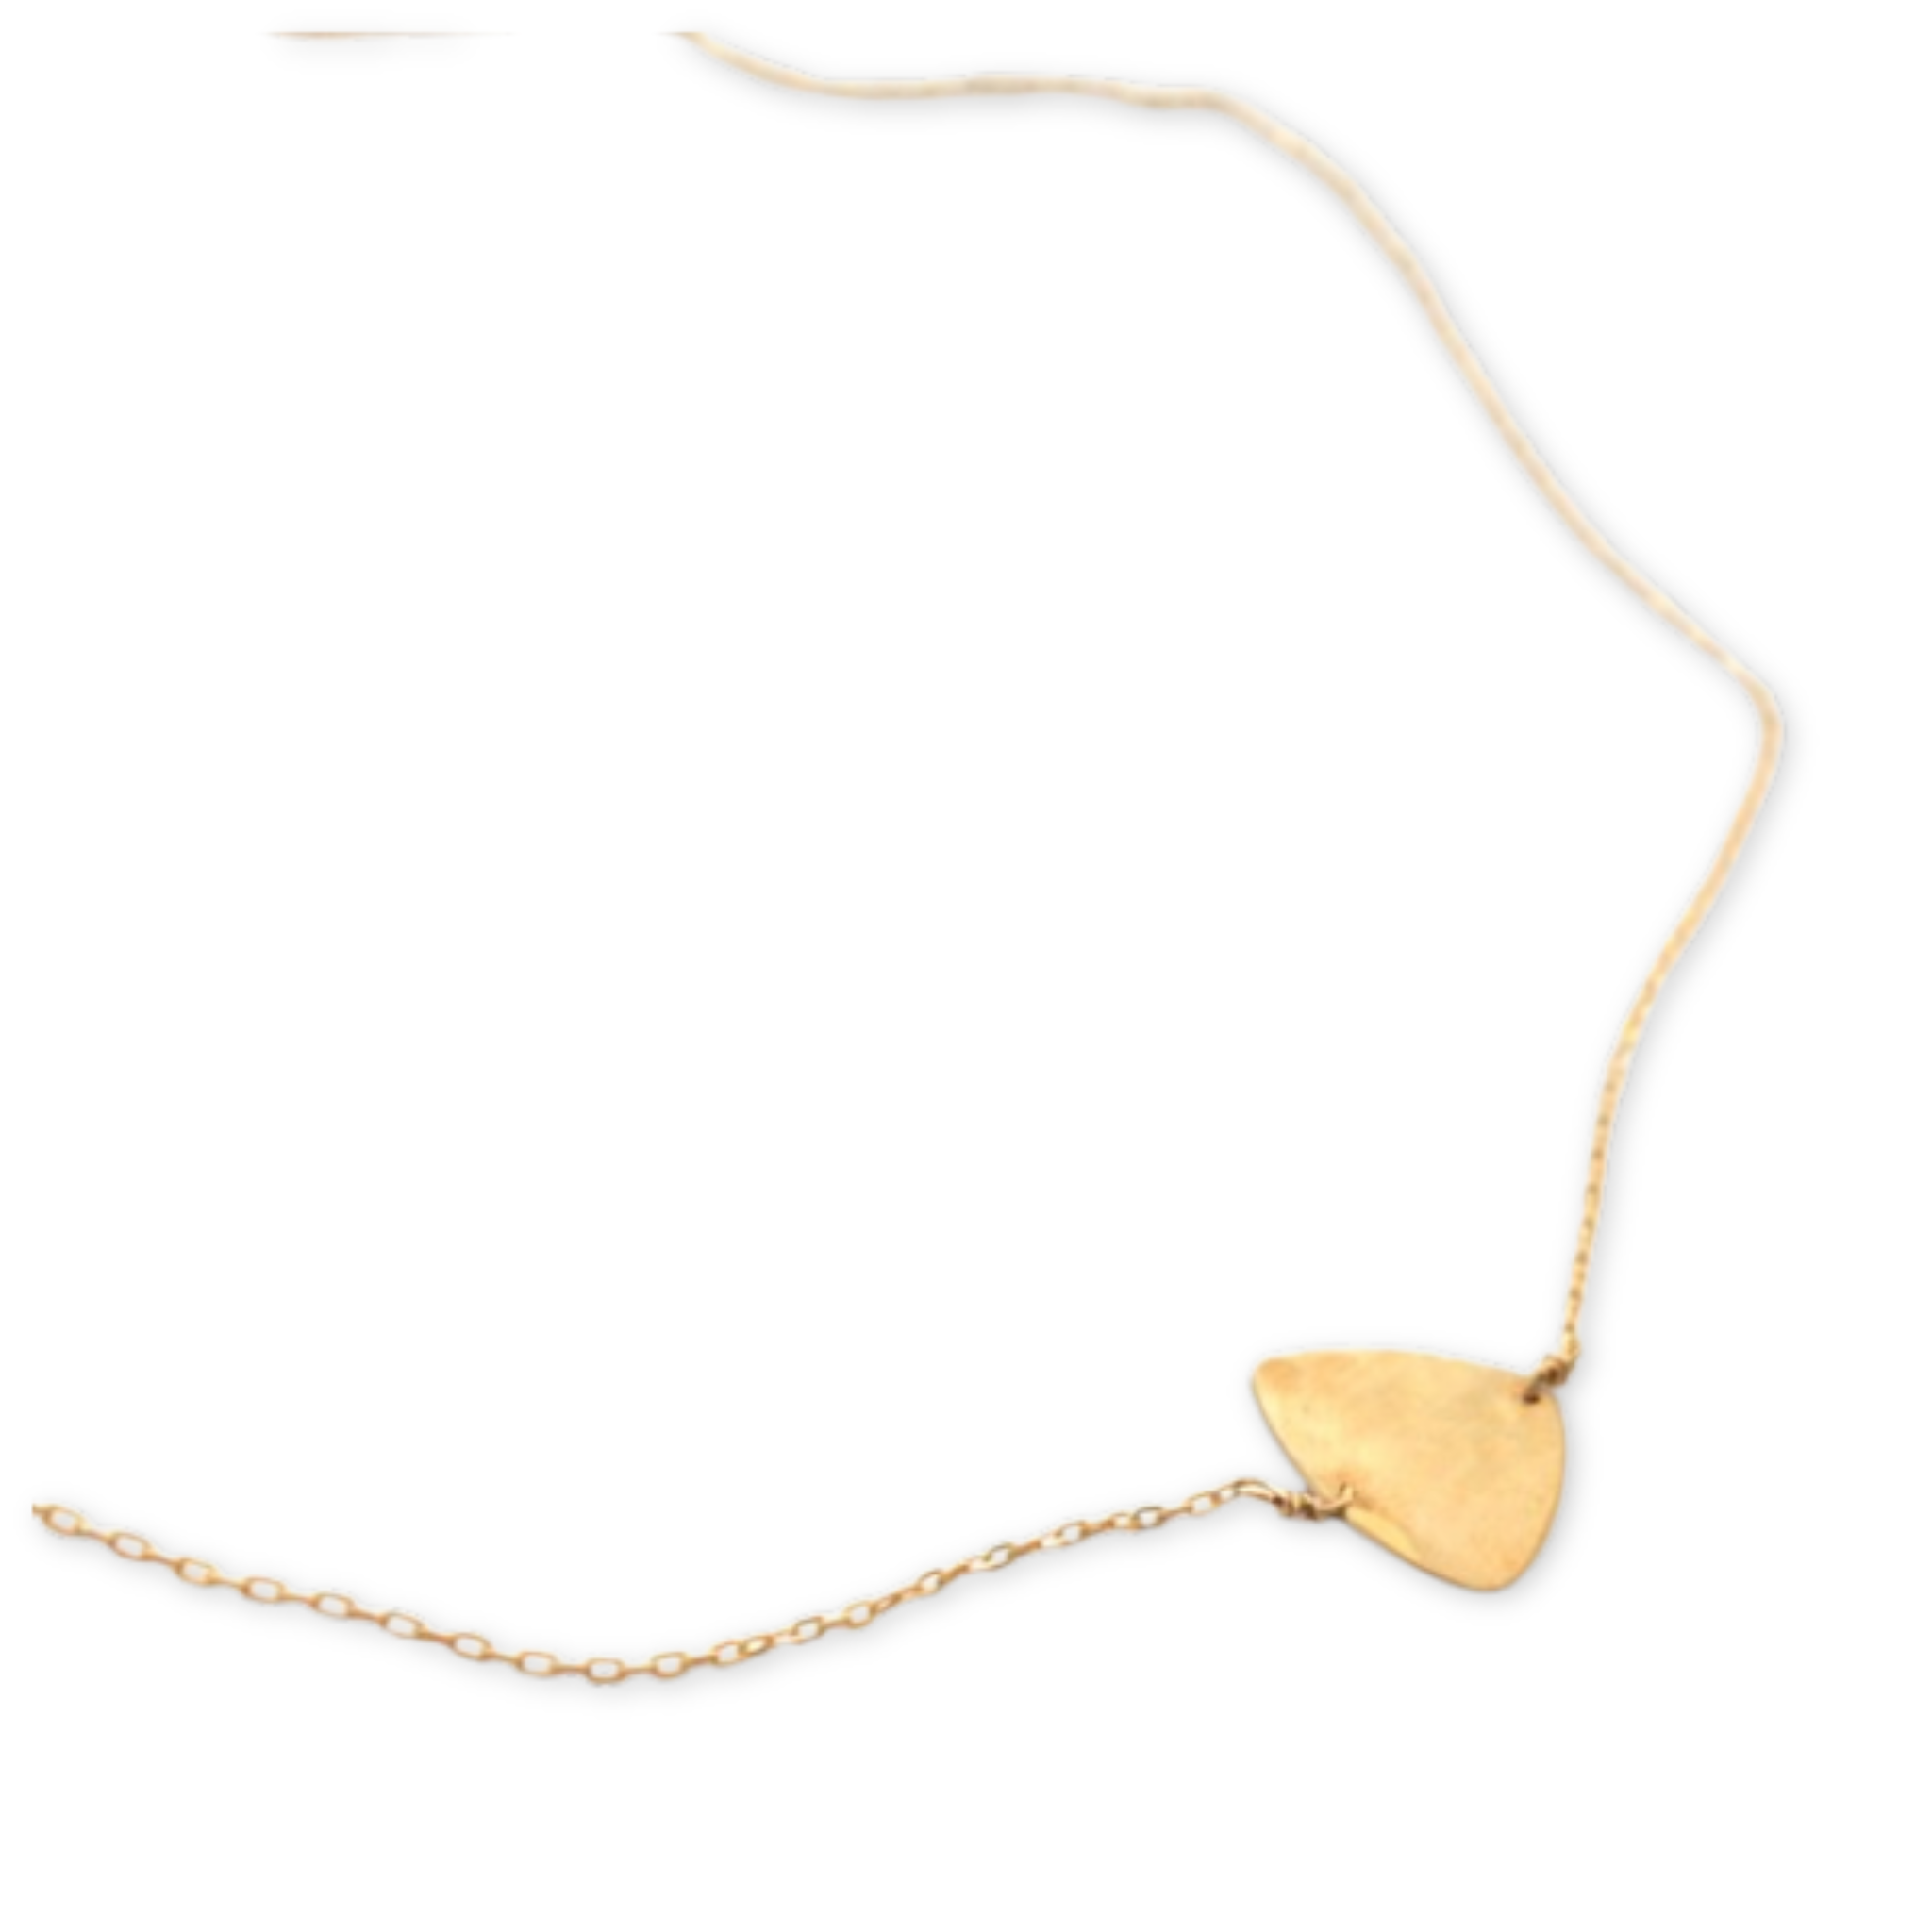 necklace with a rounded triangle pendant